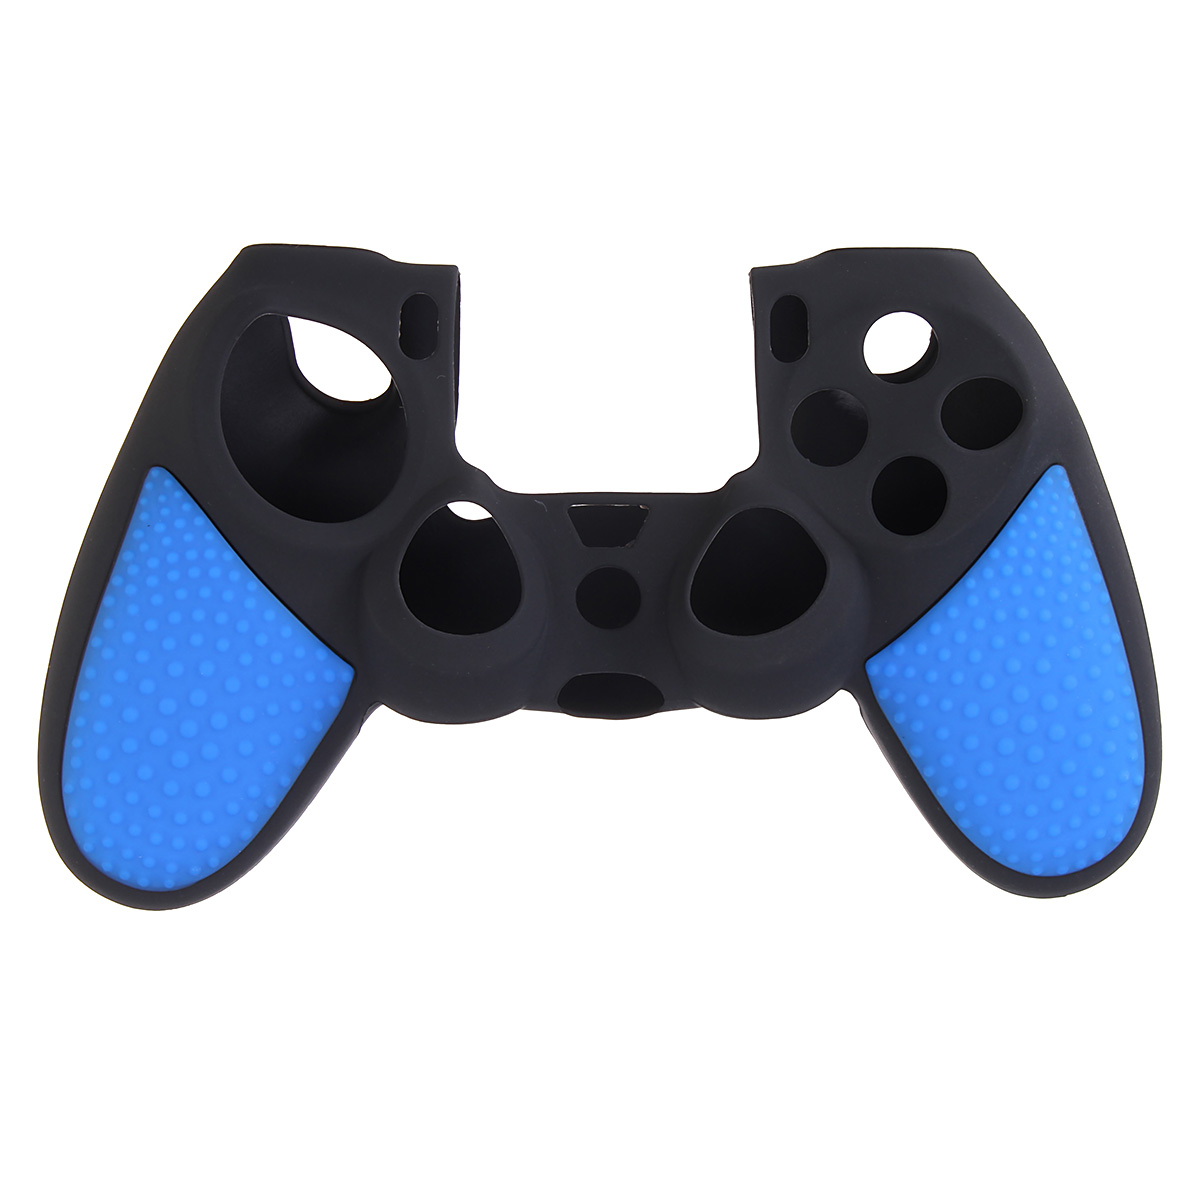 Silicon Cover Case Protection Skin for SONY for Playstation 4 PS4 for Dualshock 4 Game Controller 31